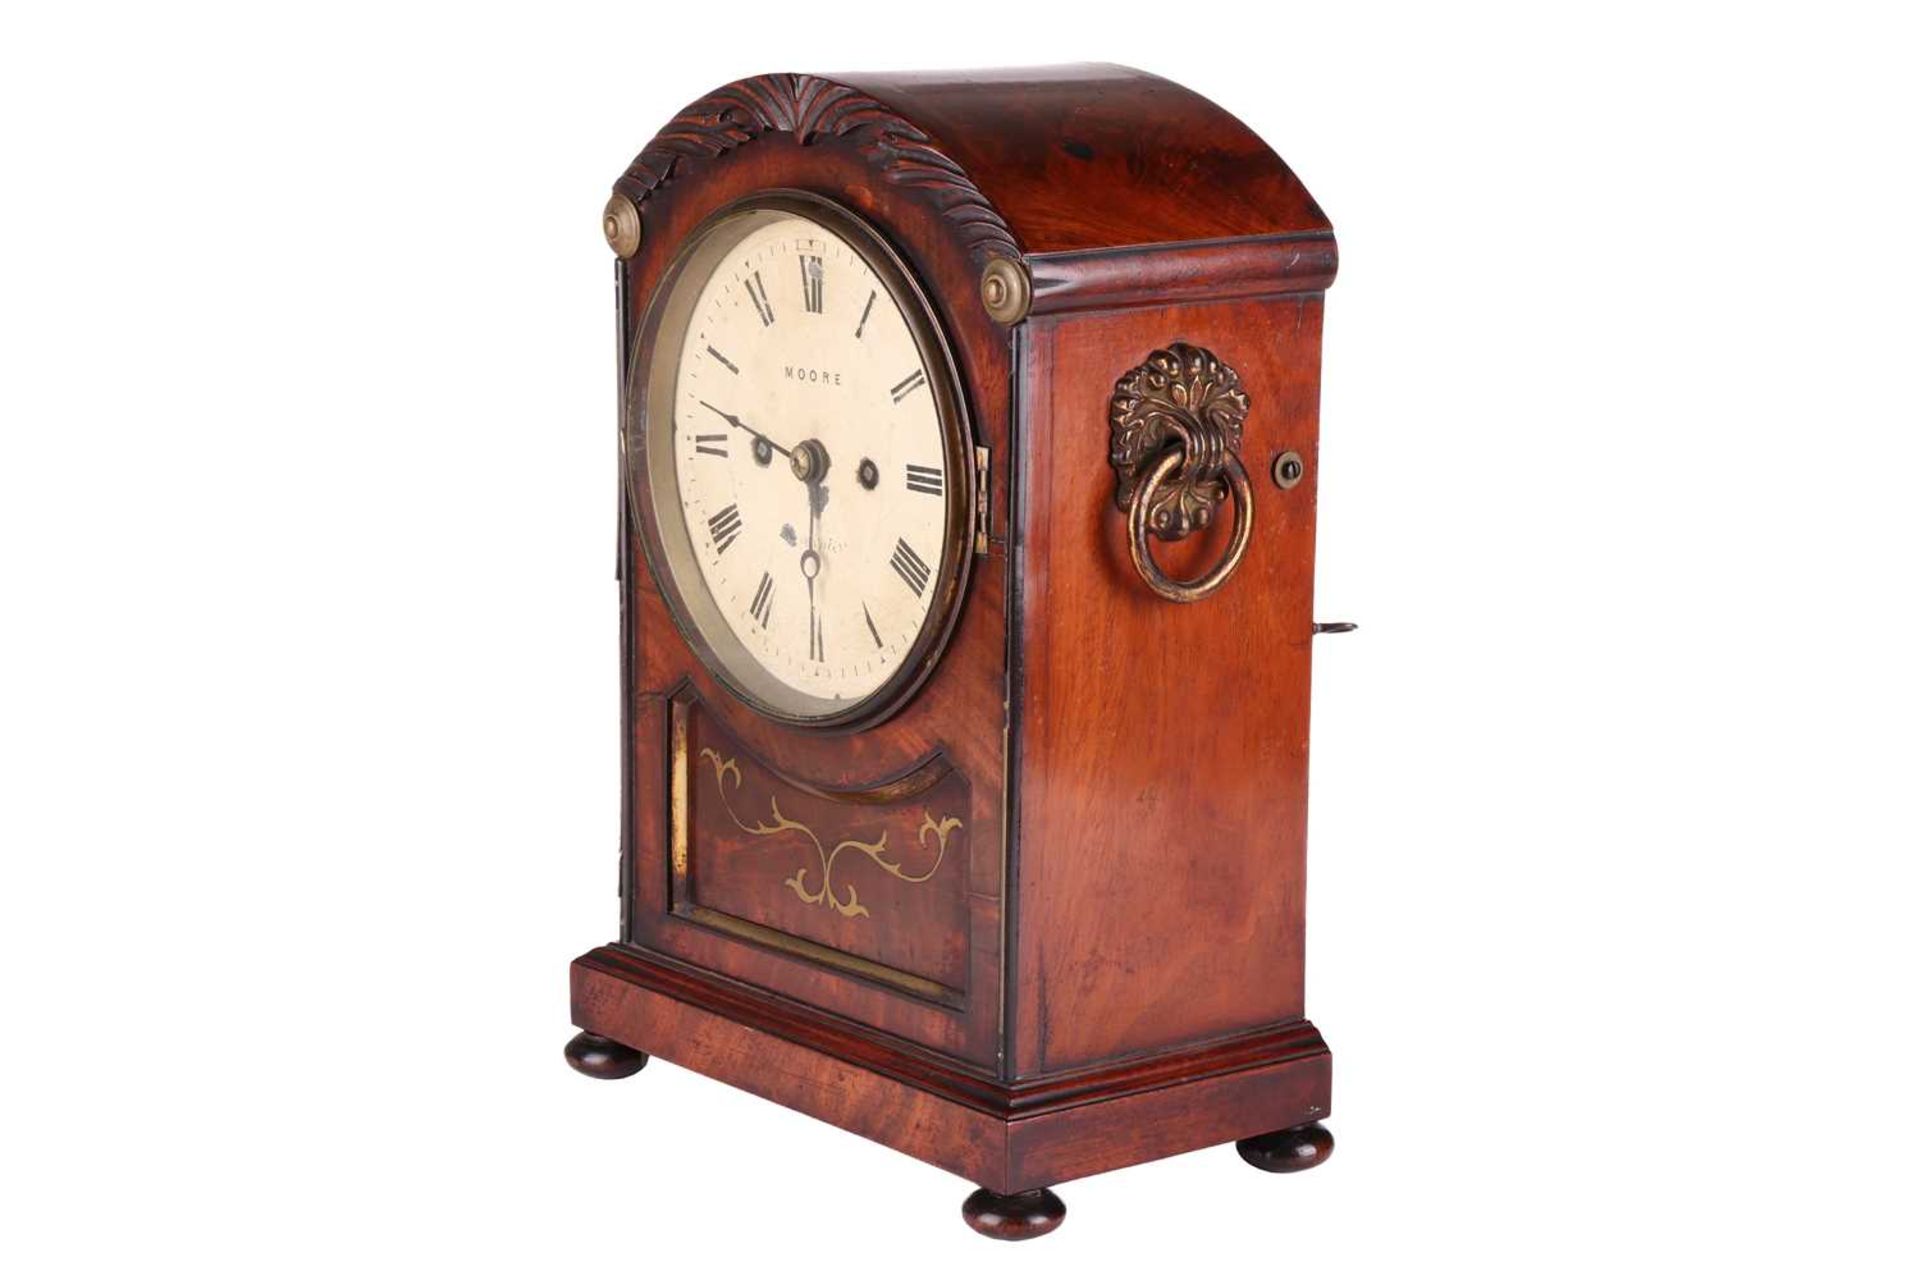 Moore of London a Regency mahogany 8-day twin fusee mantel clock case, with an arched top case and p - Image 5 of 7